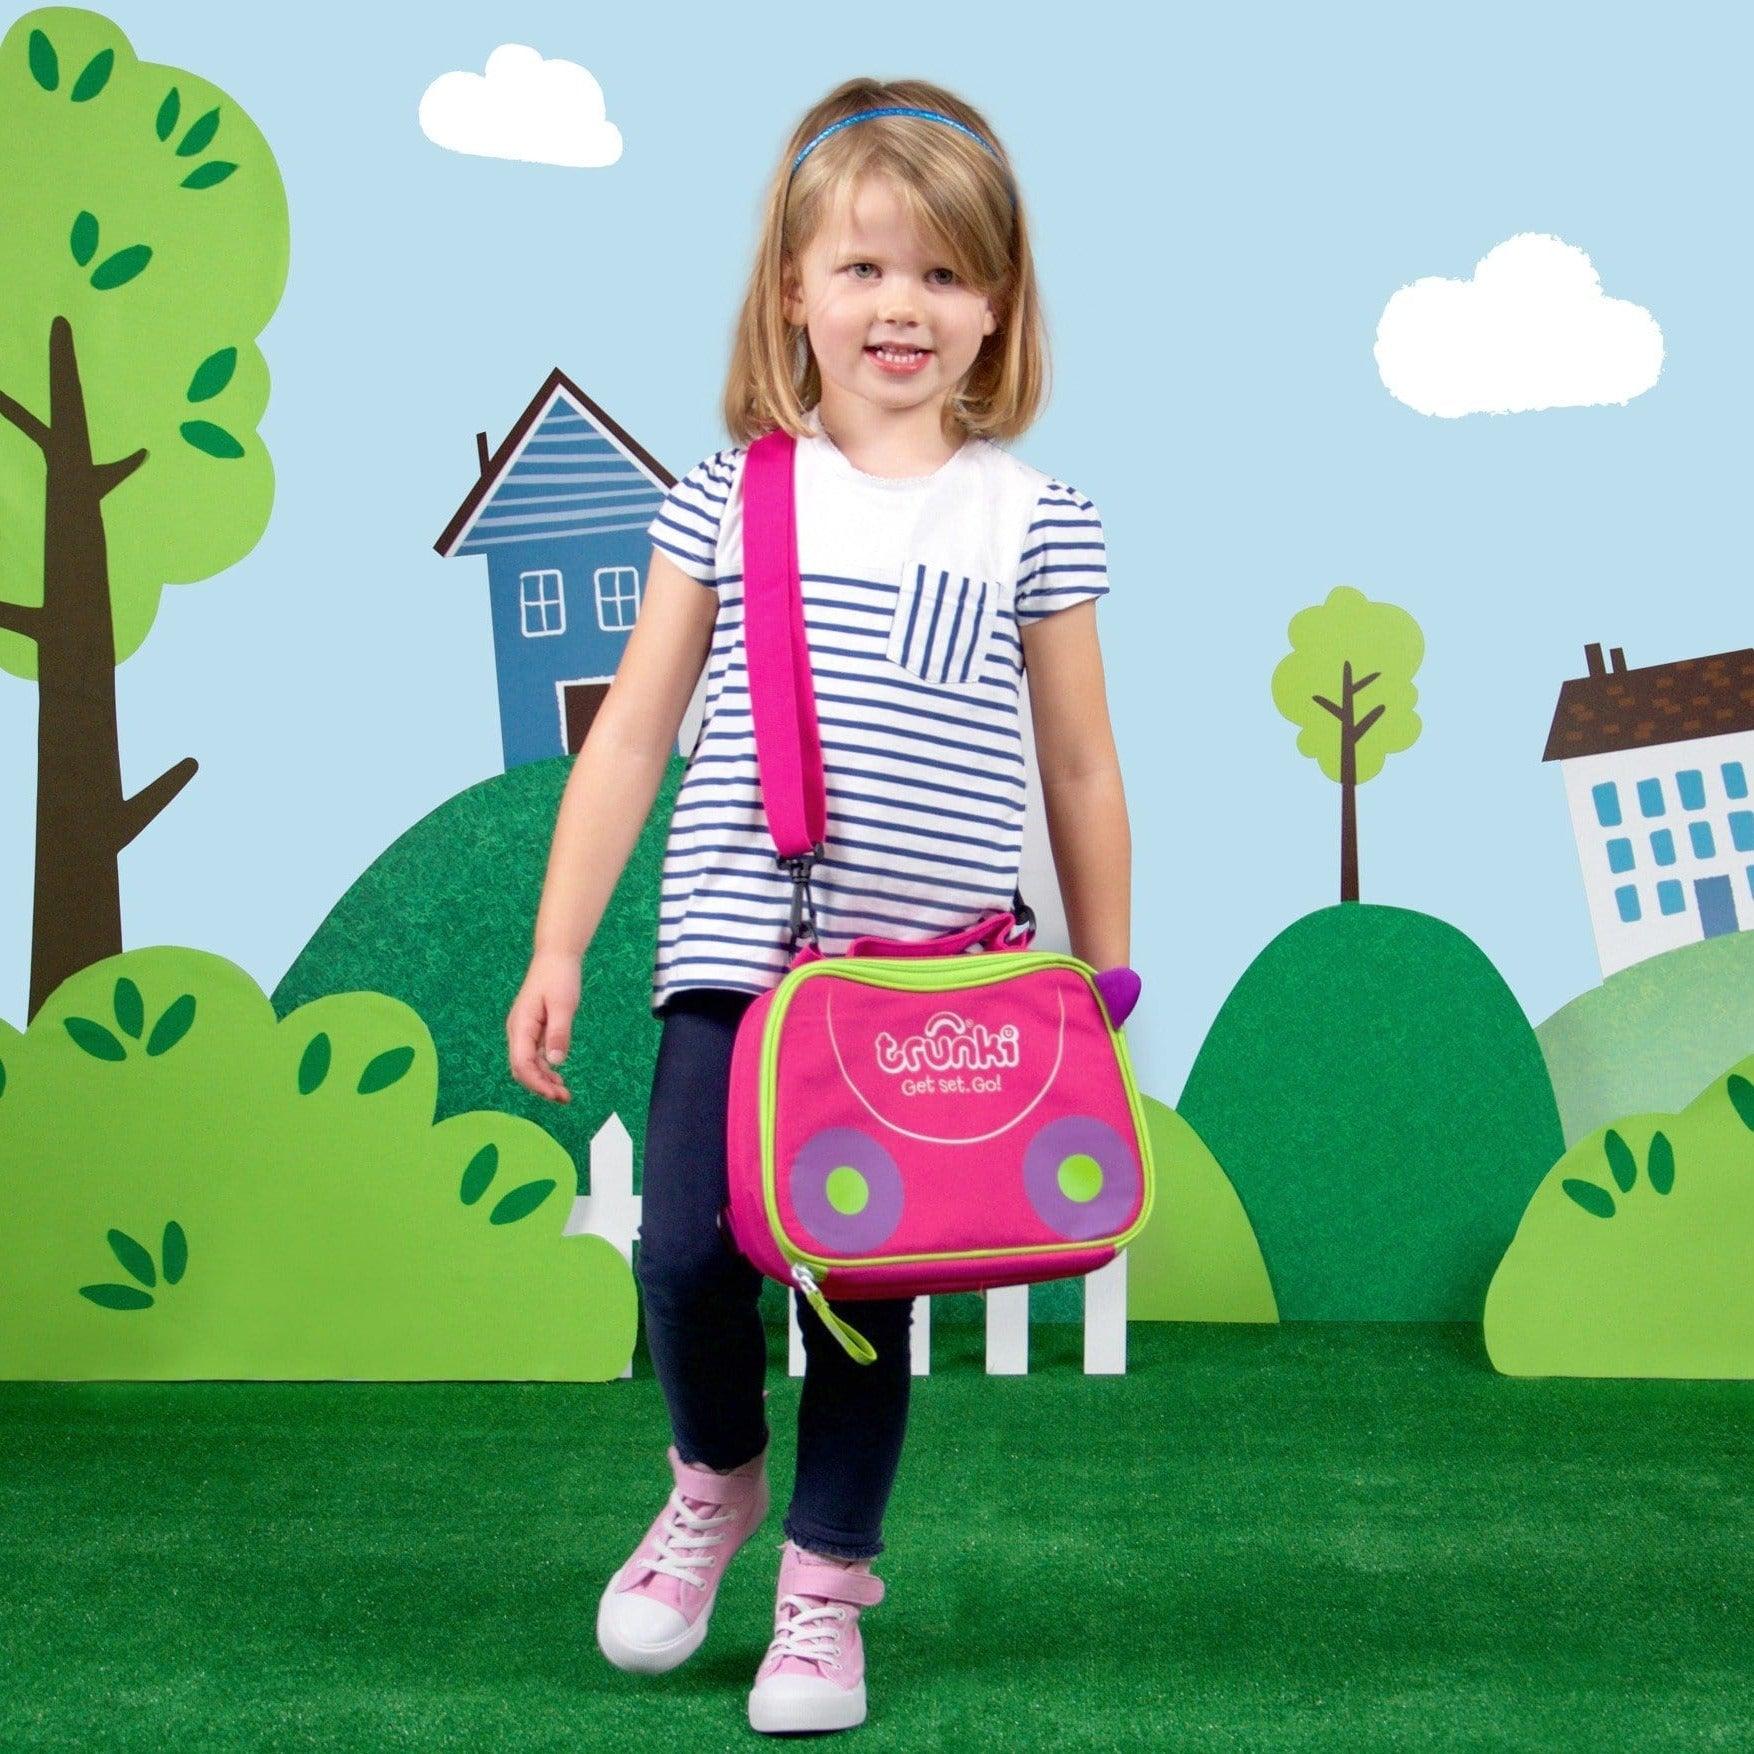 Trunki: termisk morgenmadspose pink Trixie